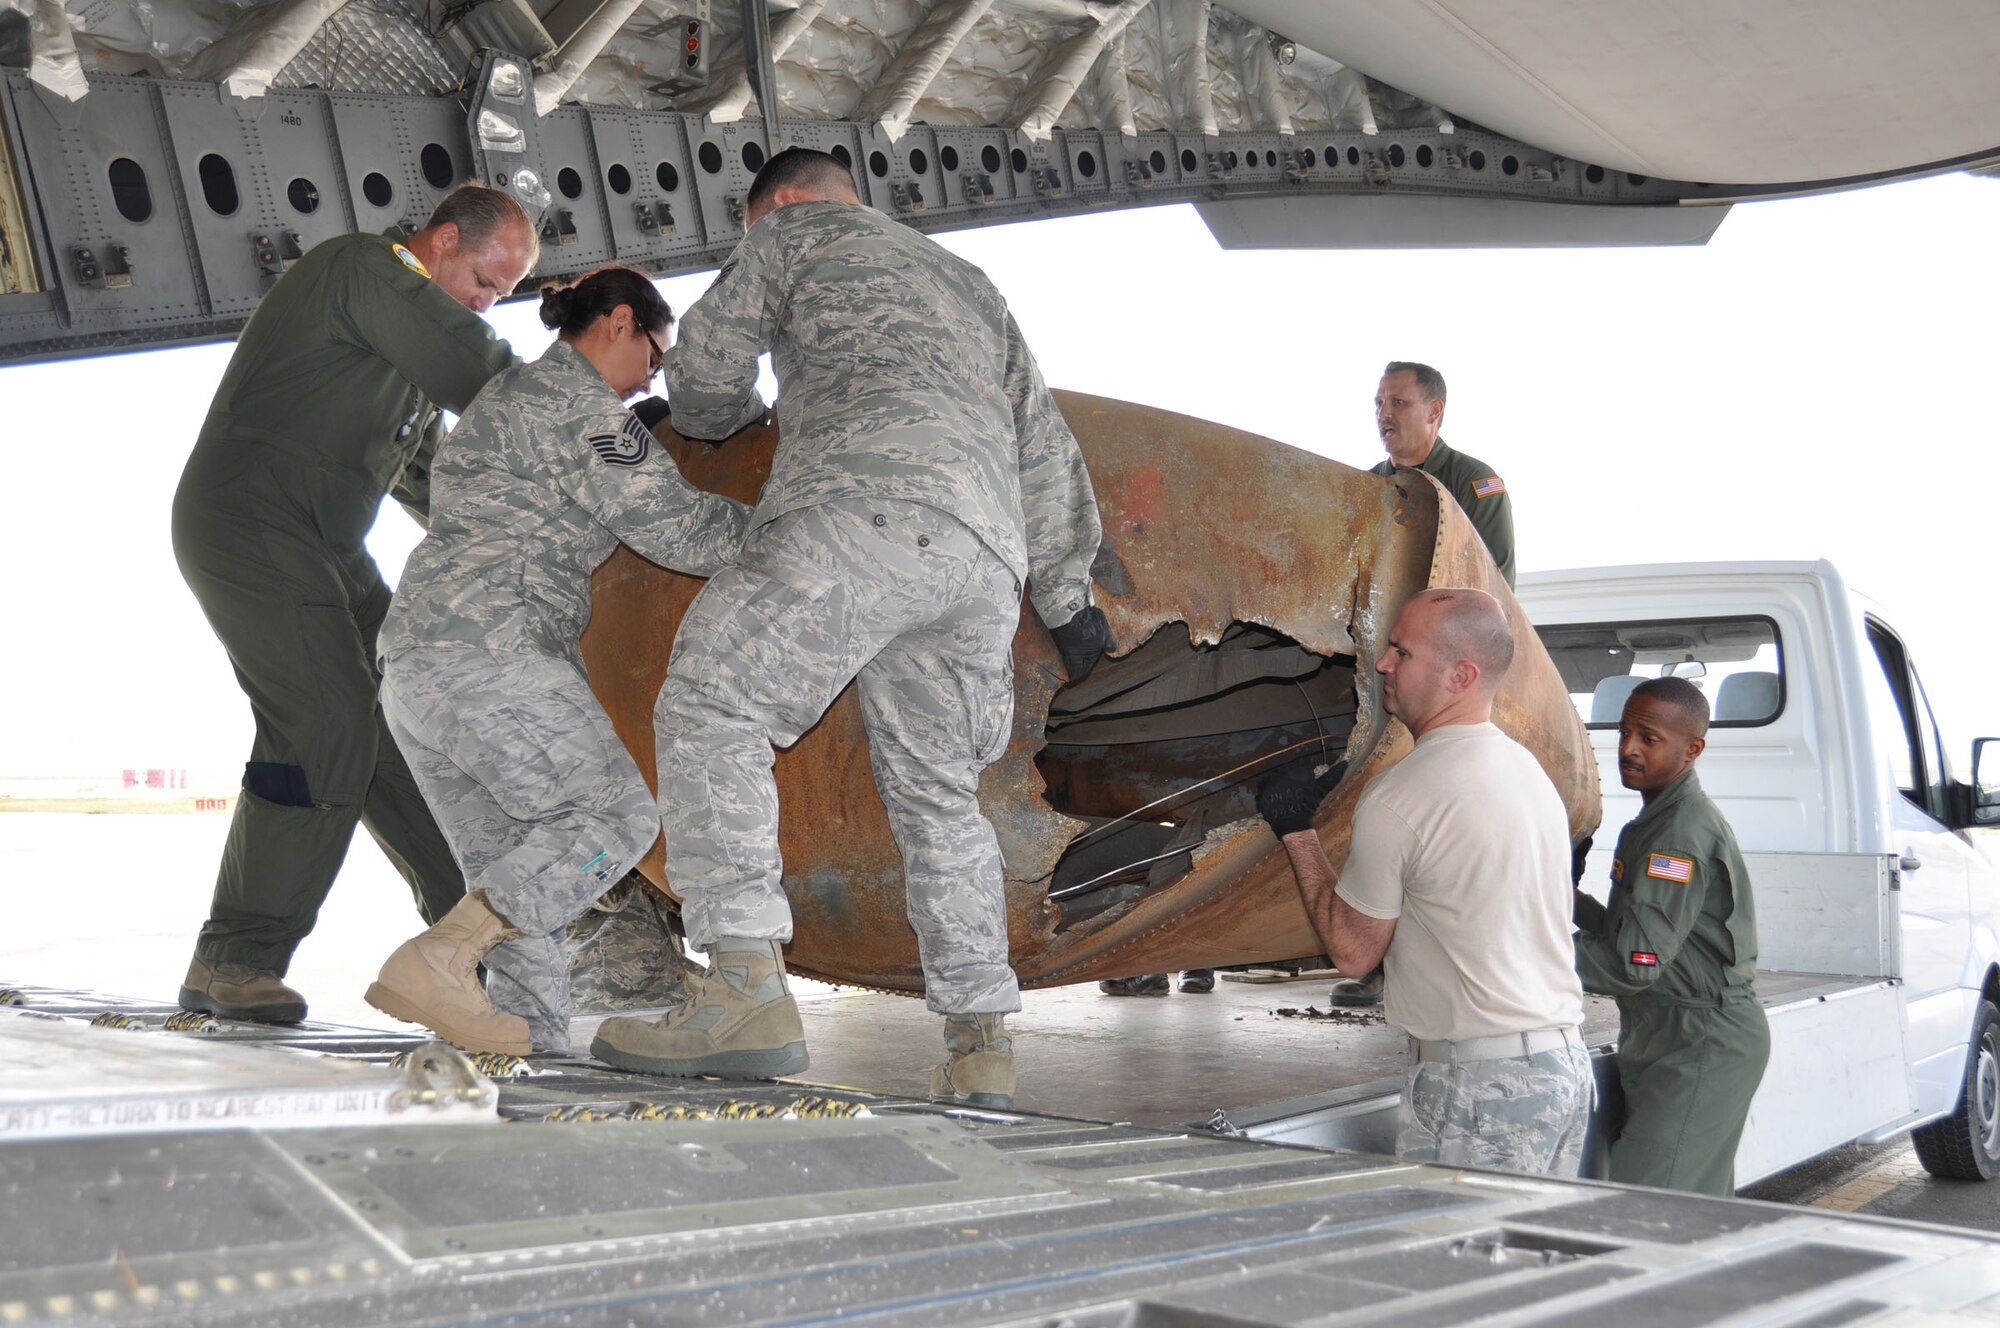 Air Force reservists hoist a 480-pound rocket part into a C-17 Globemaster III, Aug. 26, 2011.  The aircraft was in Mongolia from the 729th Airlift Squadron at March Air Reserve Base, Calif., to retrieve fallen space debris.  (U.S. Air Force photo/Master Sgt. Linda Welz)